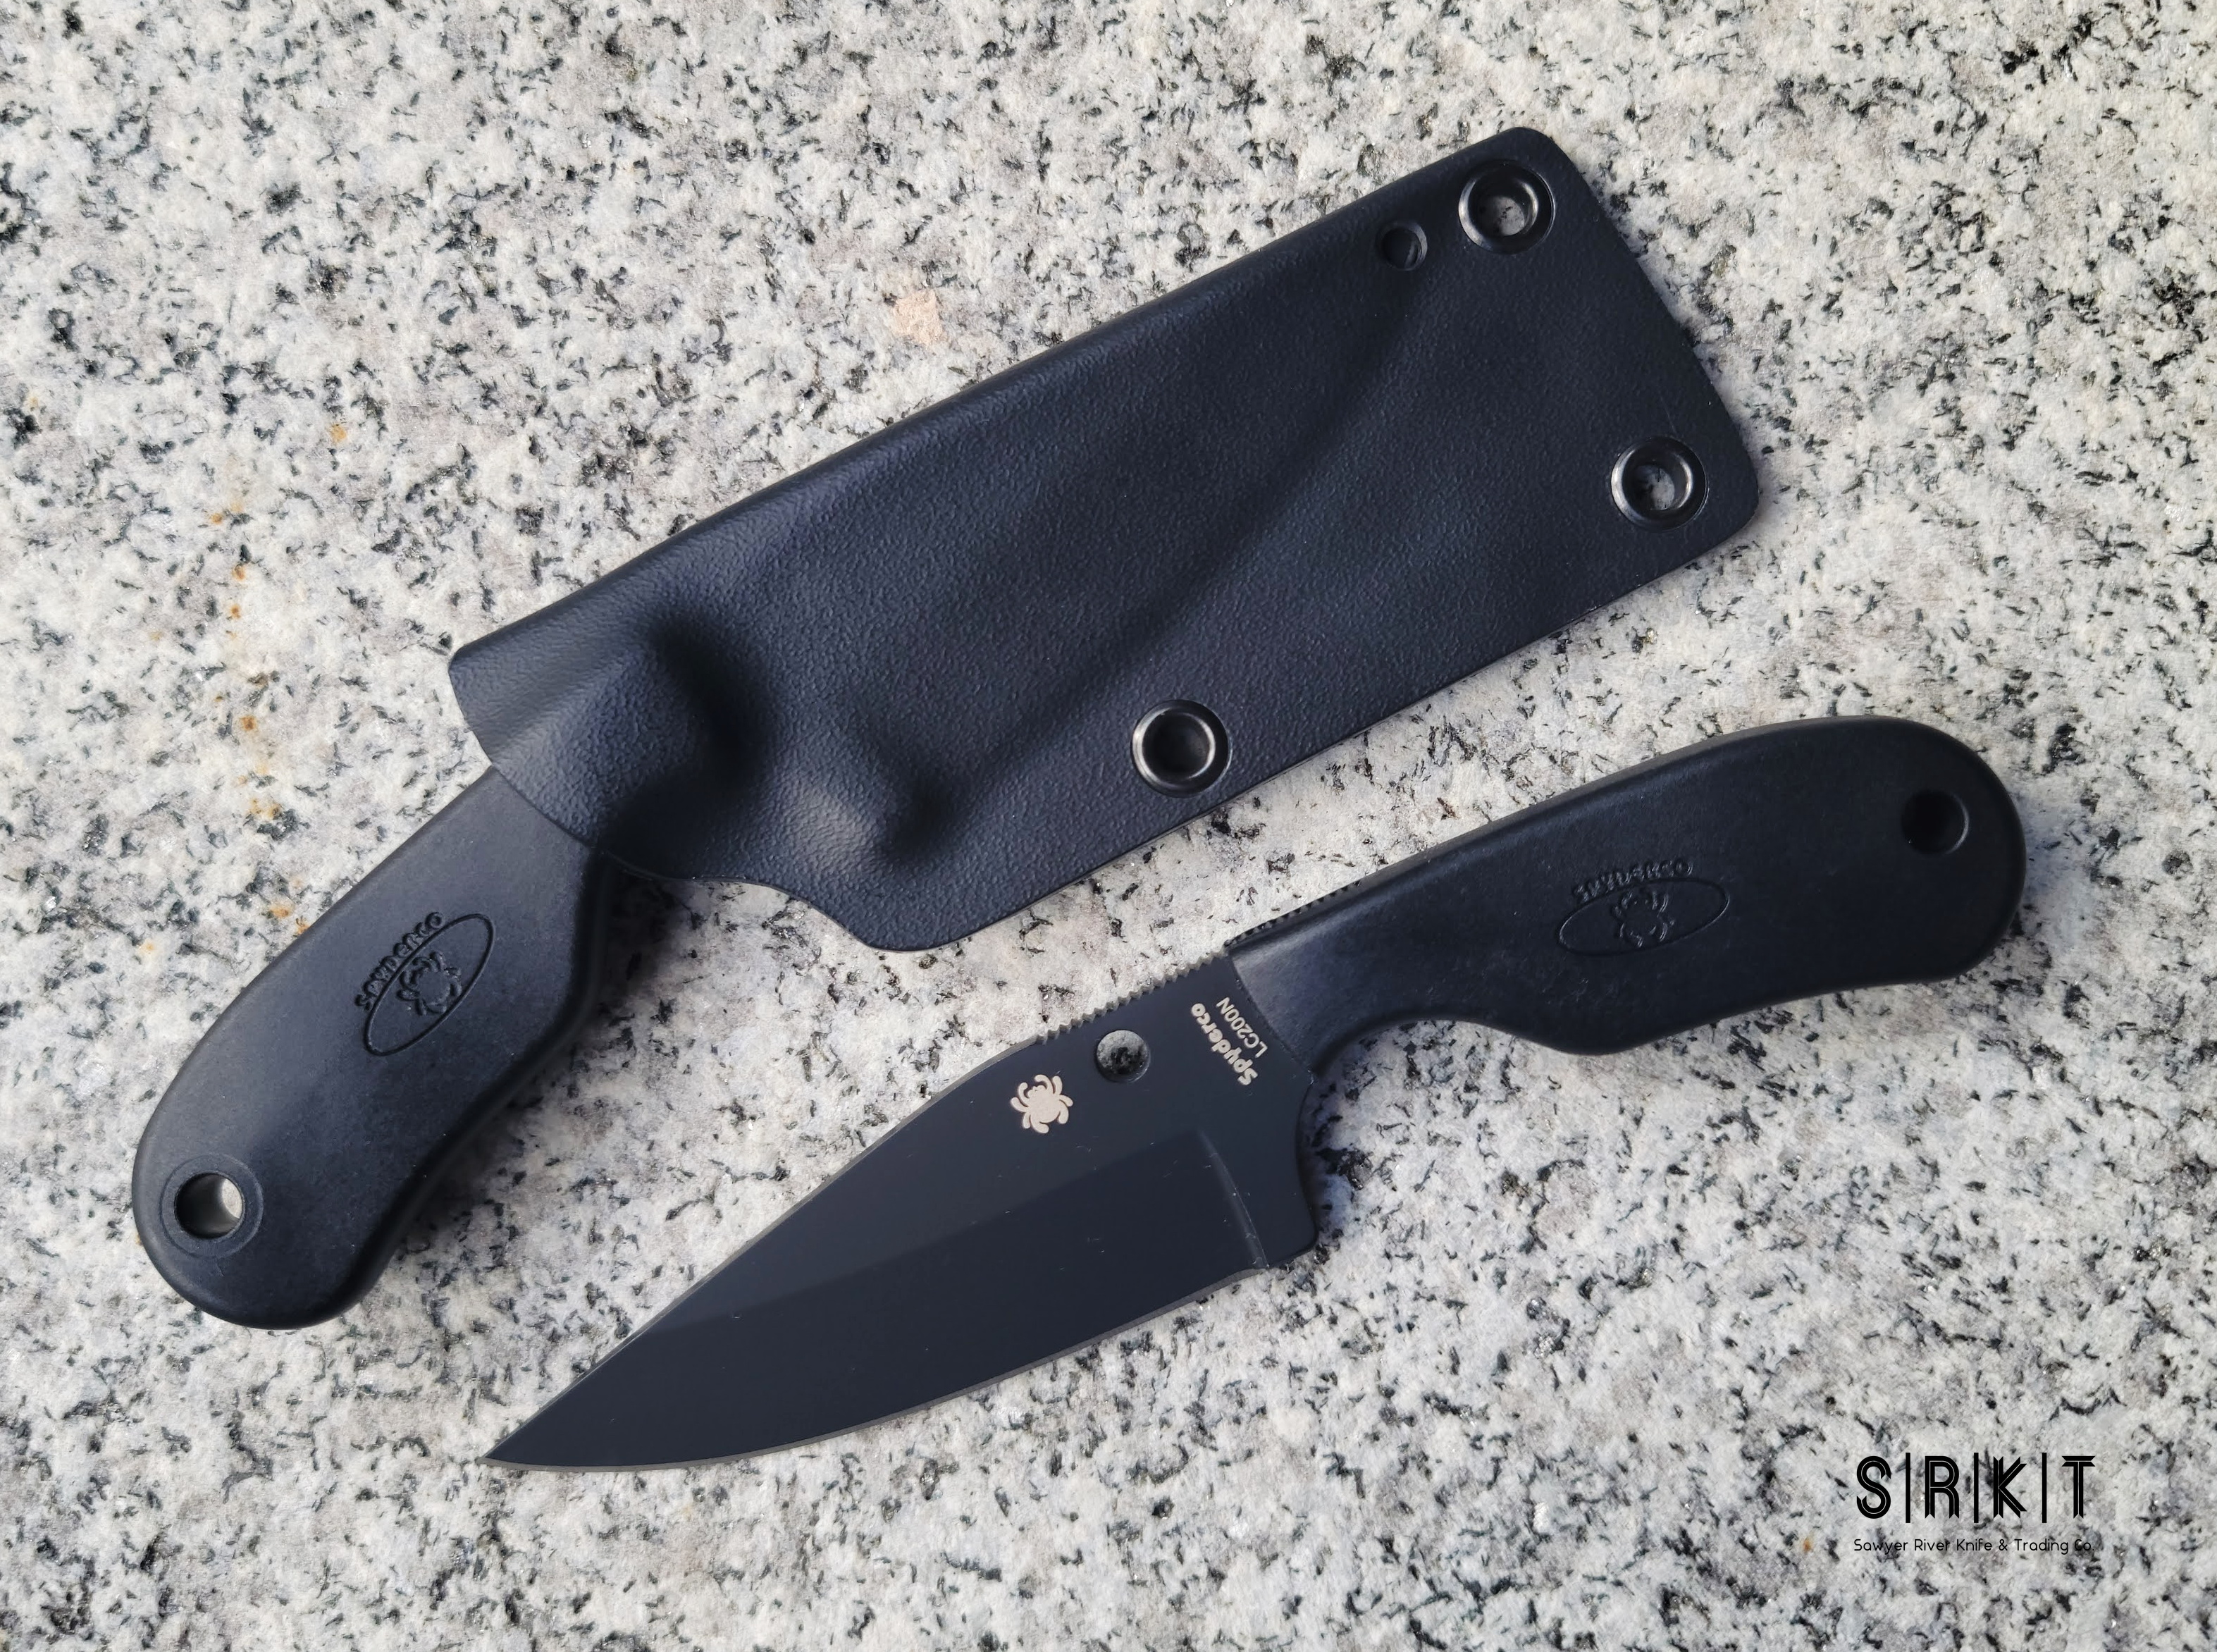 Paring knife with sheath for lunch box - Spyderco Forums